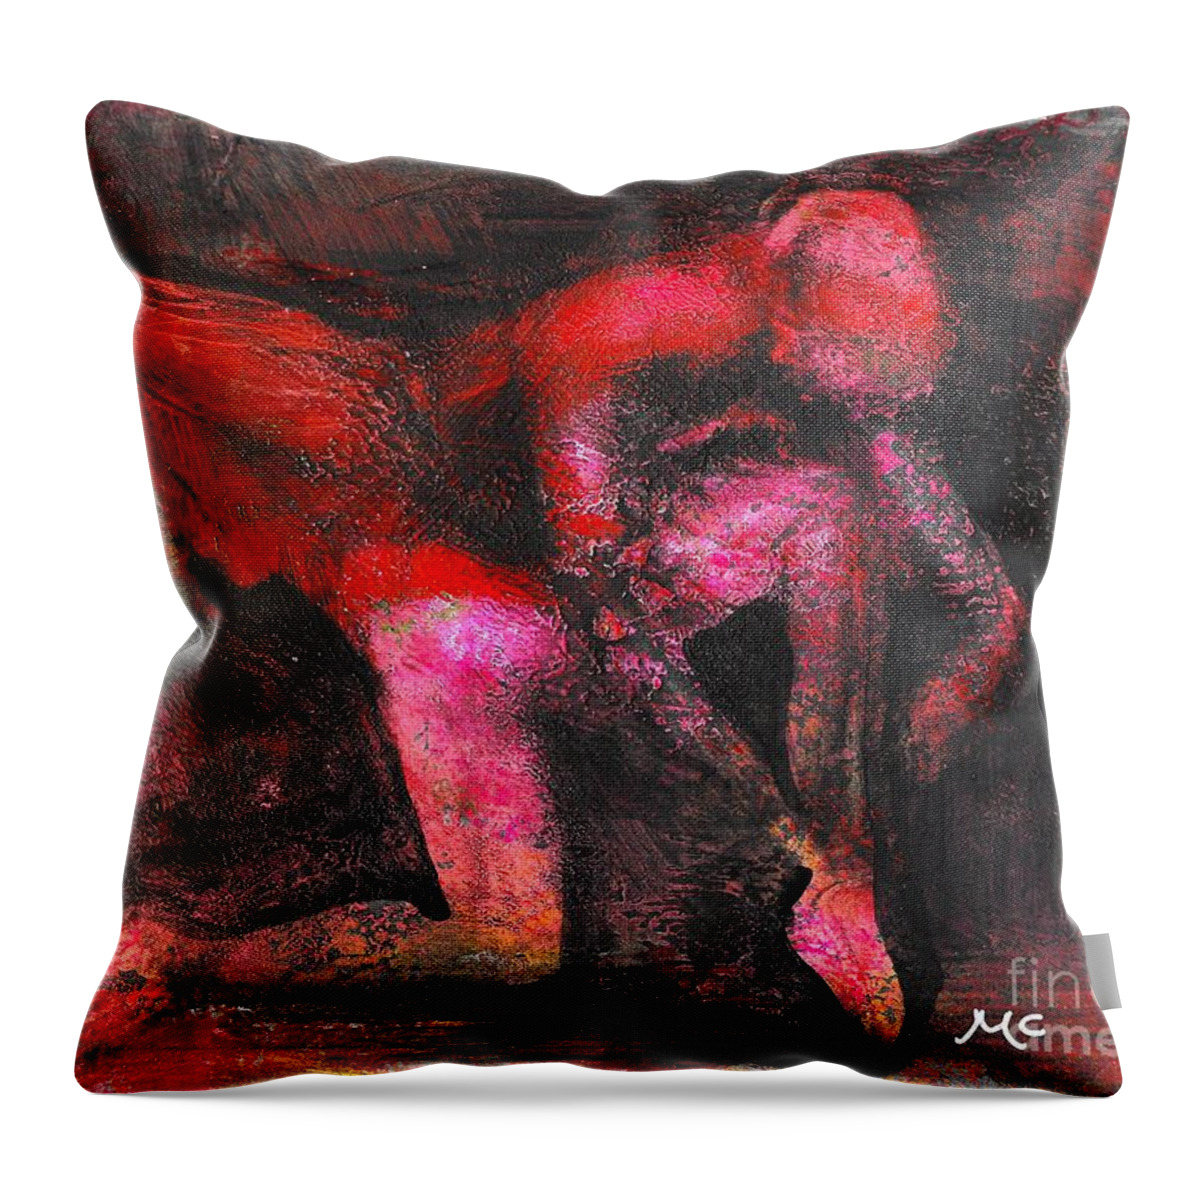 Dancer Throw Pillow featuring the mixed media The Red Dancer by Mafalda Cento